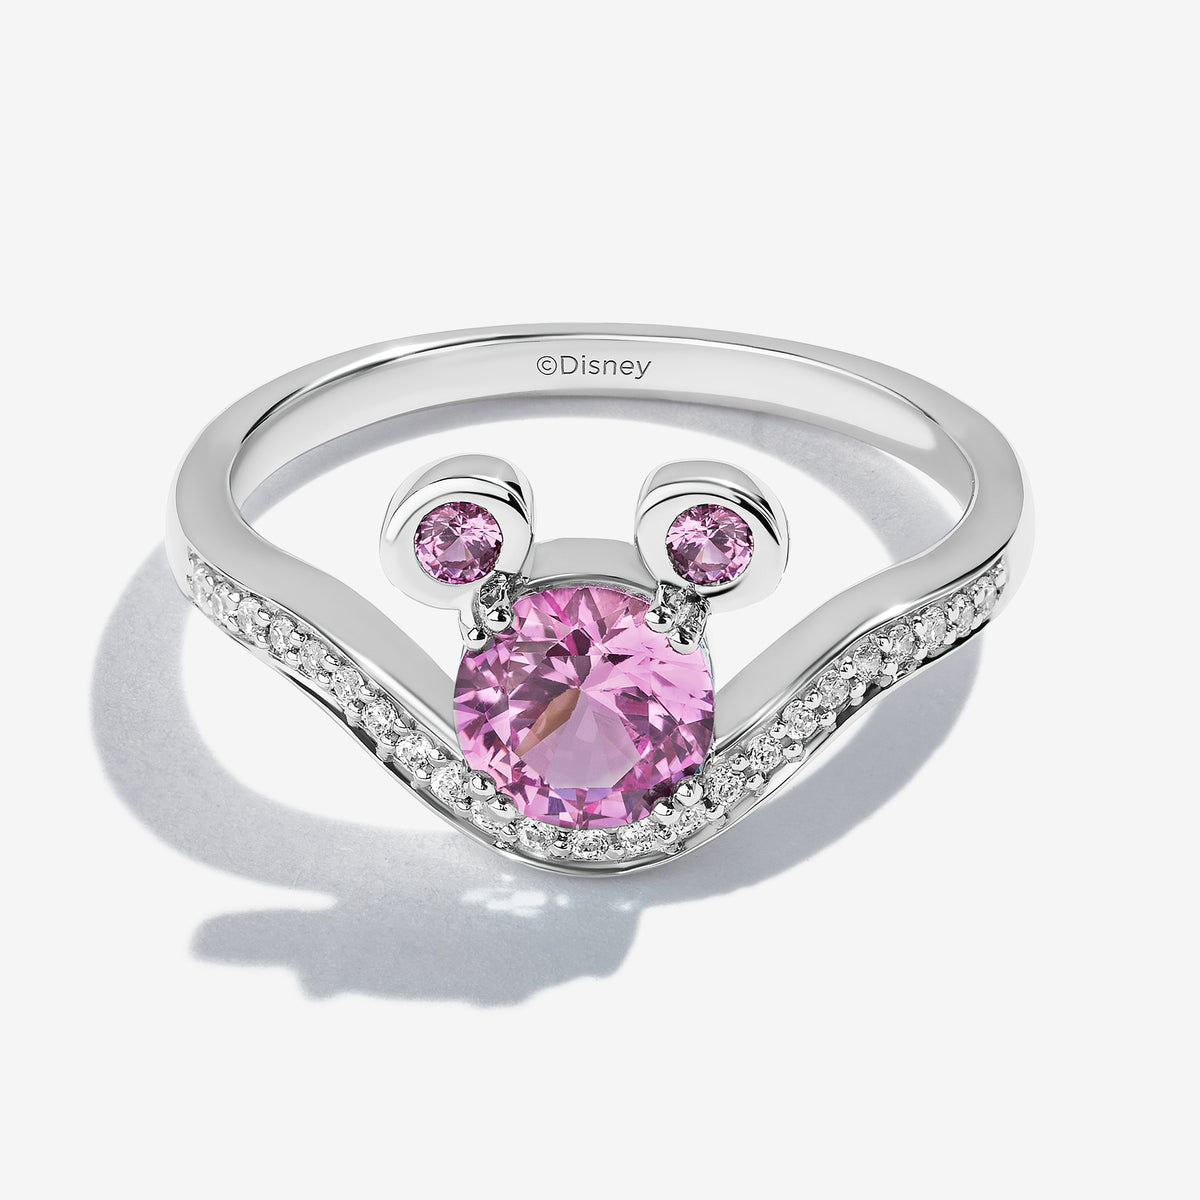 Disney Mickey Mouse Inspired Created Pink Sapphire & Diamond Ring 1/6 Cttw | Disney Fine Jewelry 6